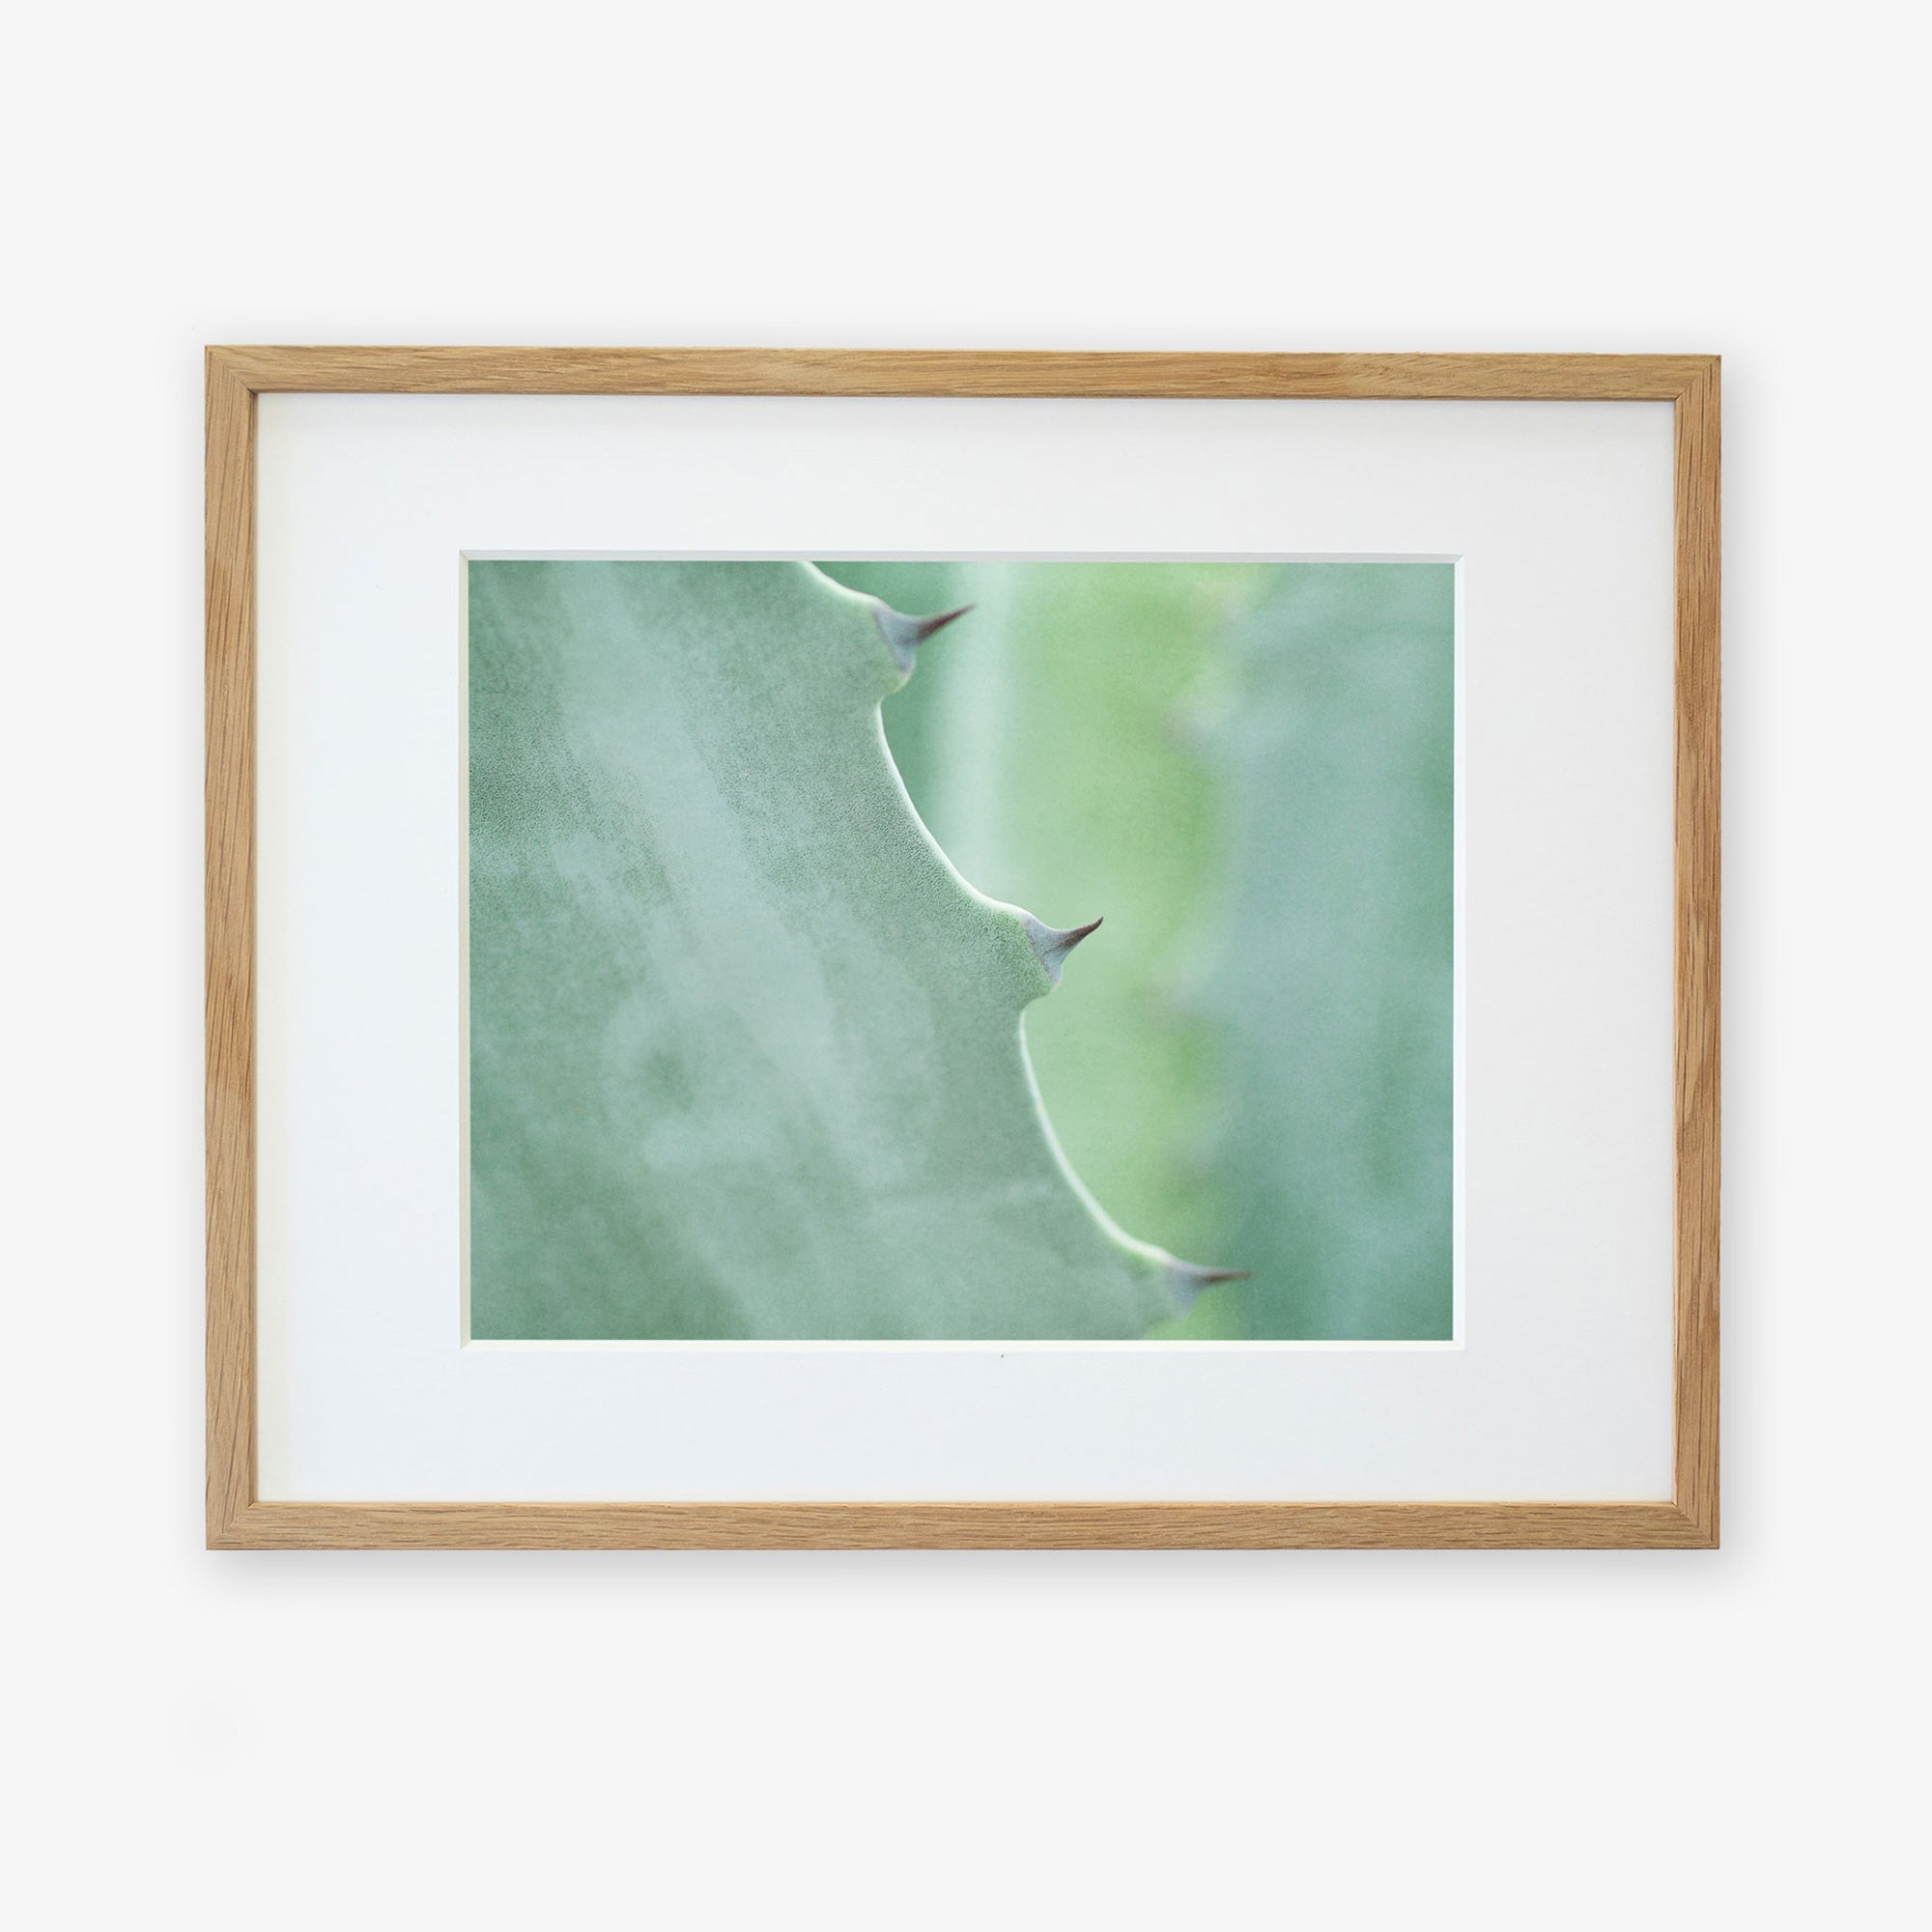 A framed Mint Green Botanical Print of a close-up view of an Aloe Vera plant leaf with sharp thorns, with a blurred green background, mounted on a white wall by Offley Green.